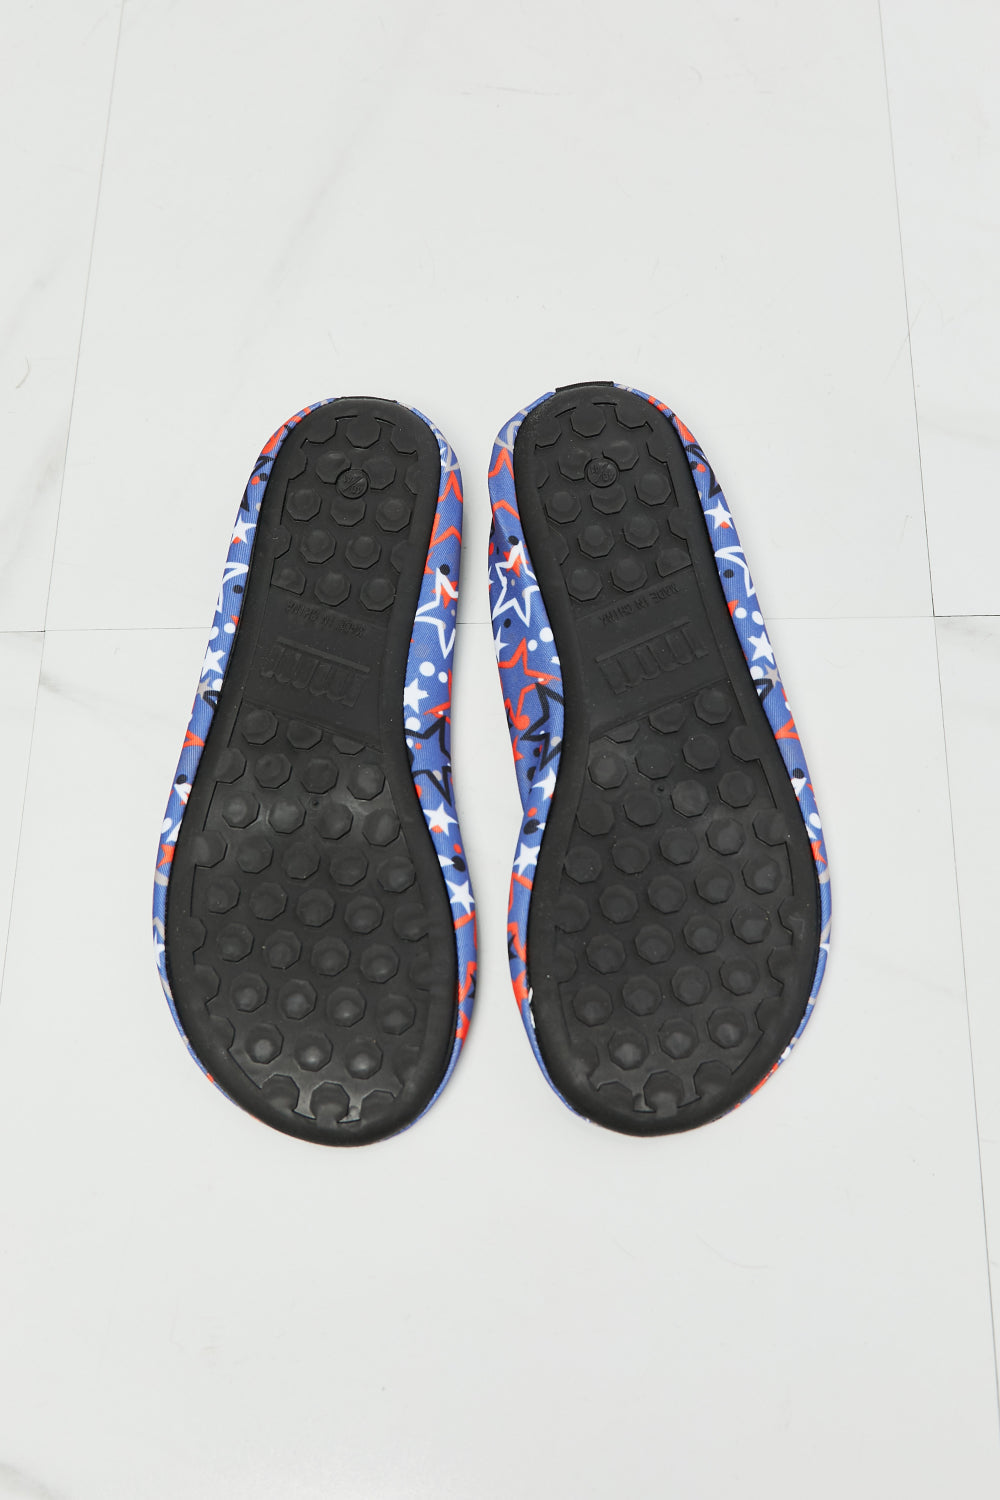 MMshoes On The Shore Water Shoes in Navy Print on any thing USA/STOD clothes